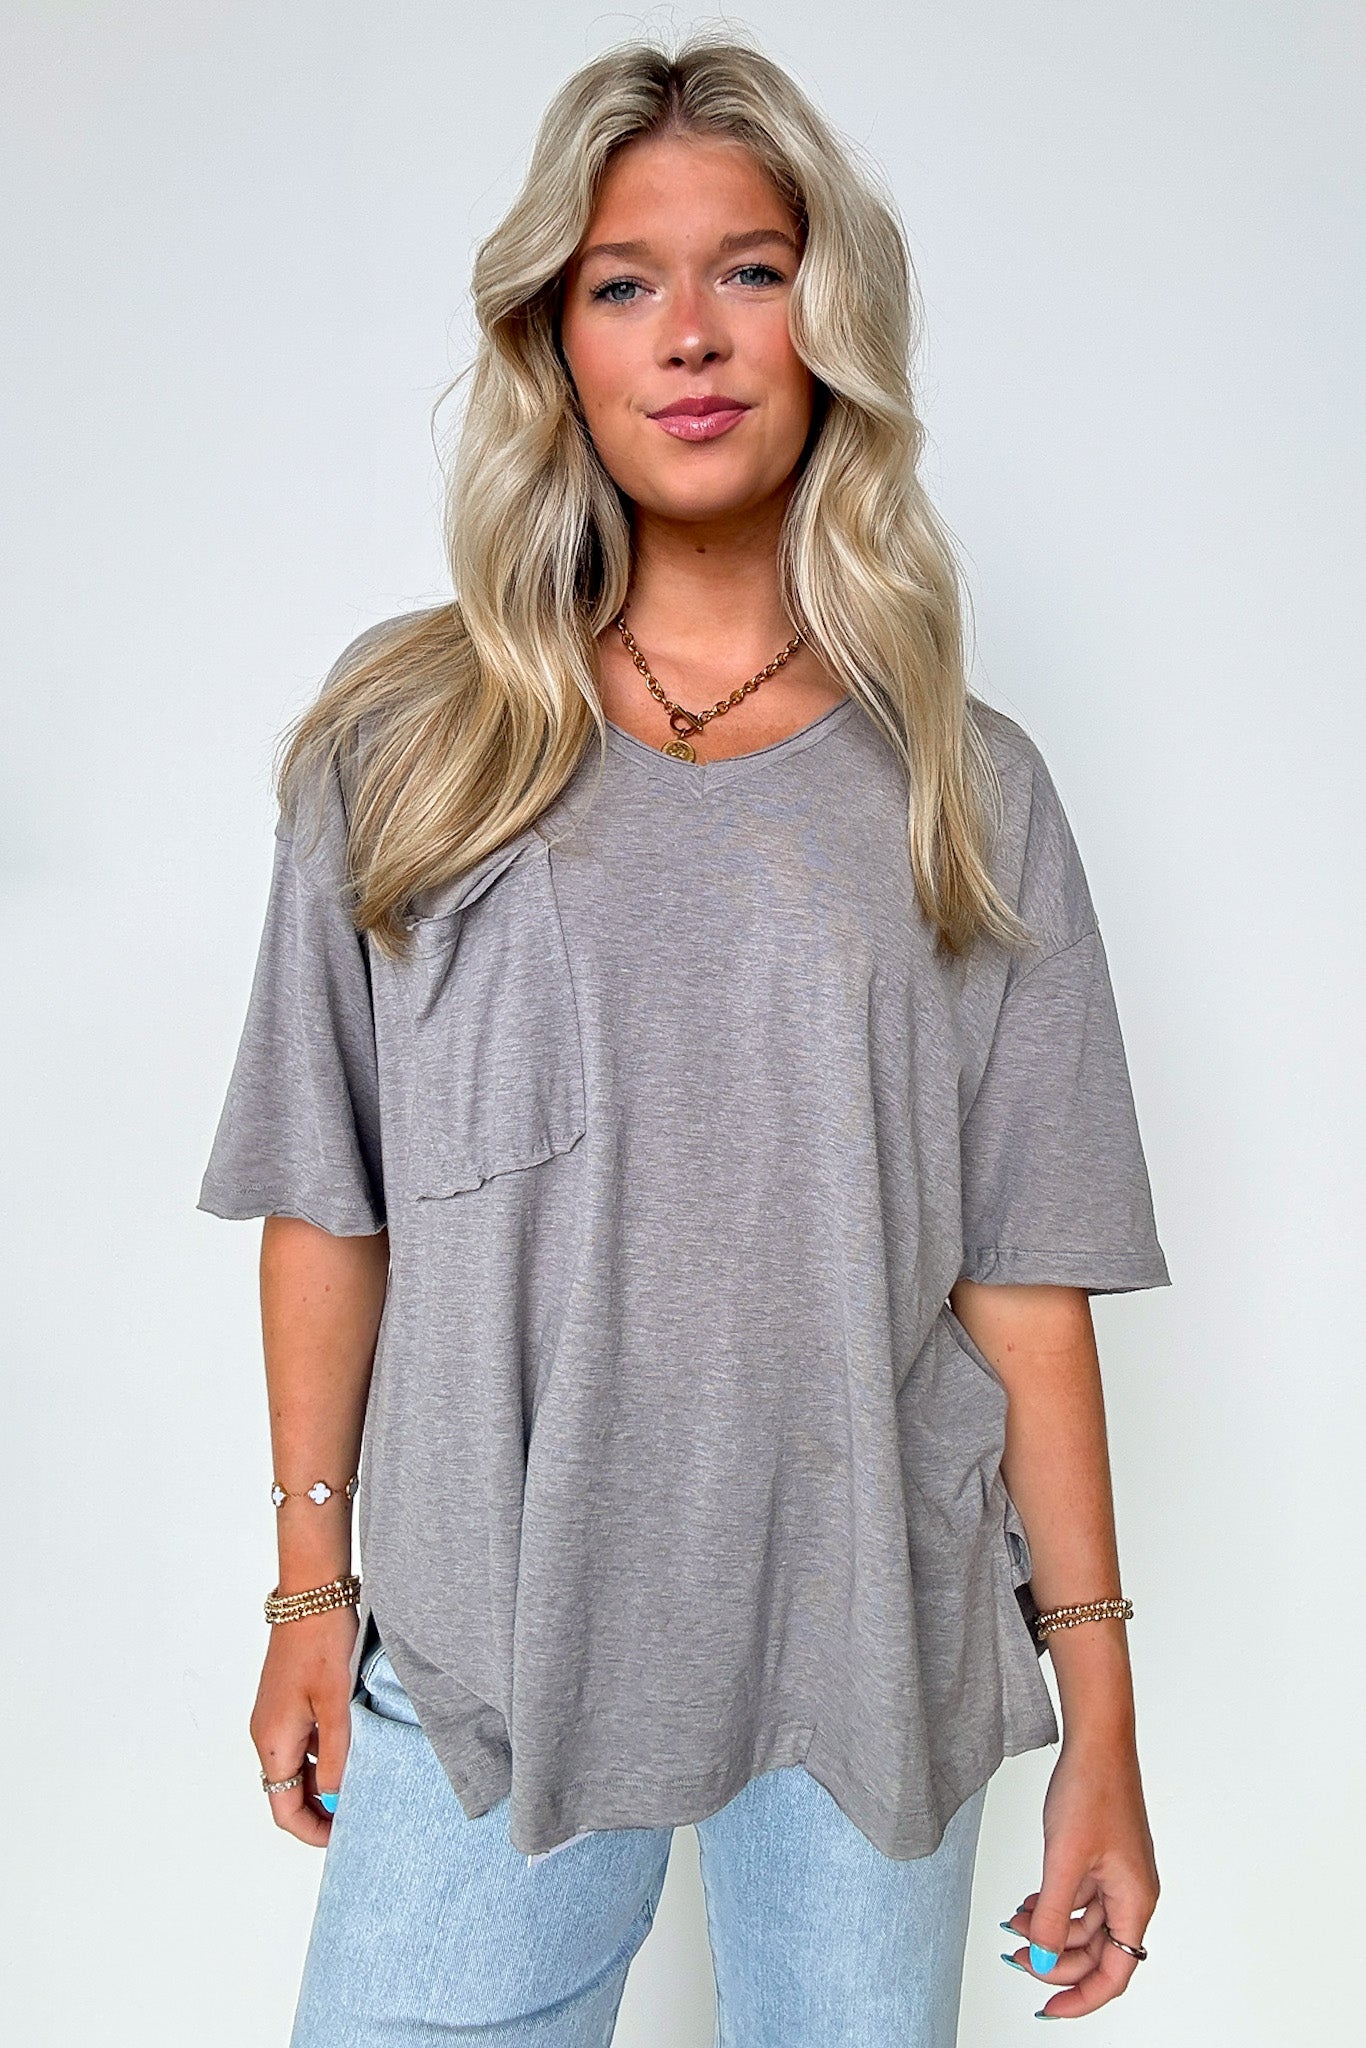  Kamree Oversized Raw Edge Pocket Top - BACK IN STOCK - Madison and Mallory